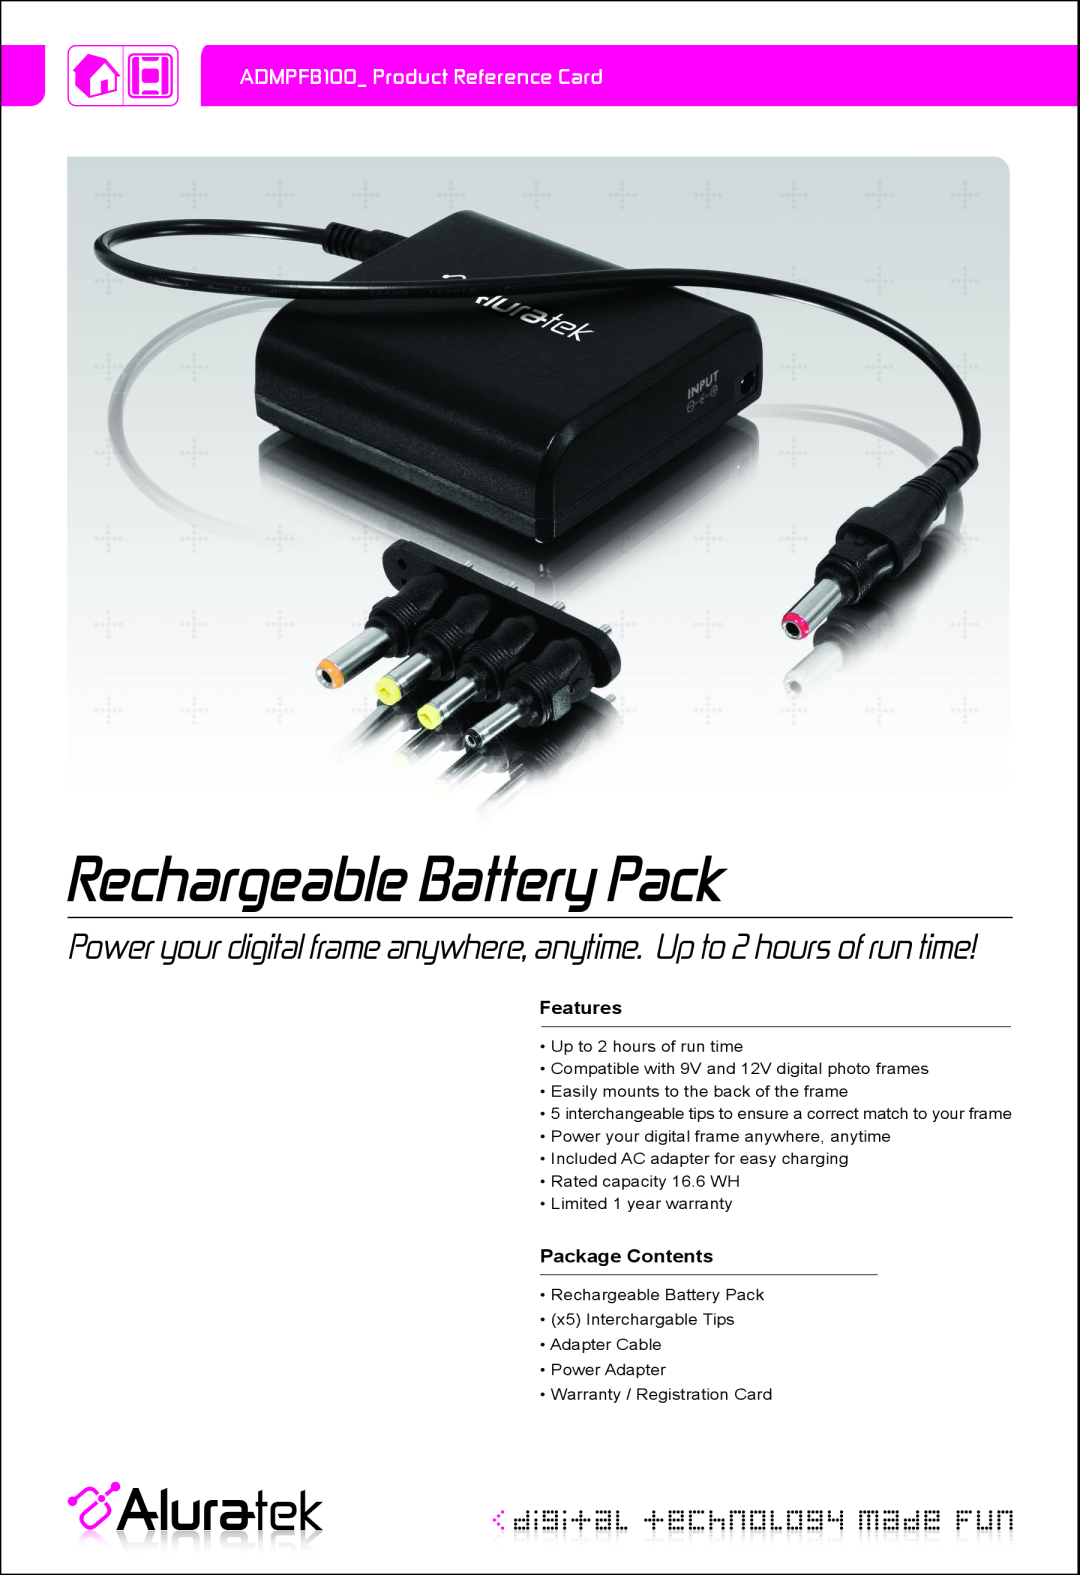 Aluratek warranty Rechargeable Battery Pack, Features, Package Contents, ADMPFB100 Product Reference Card 